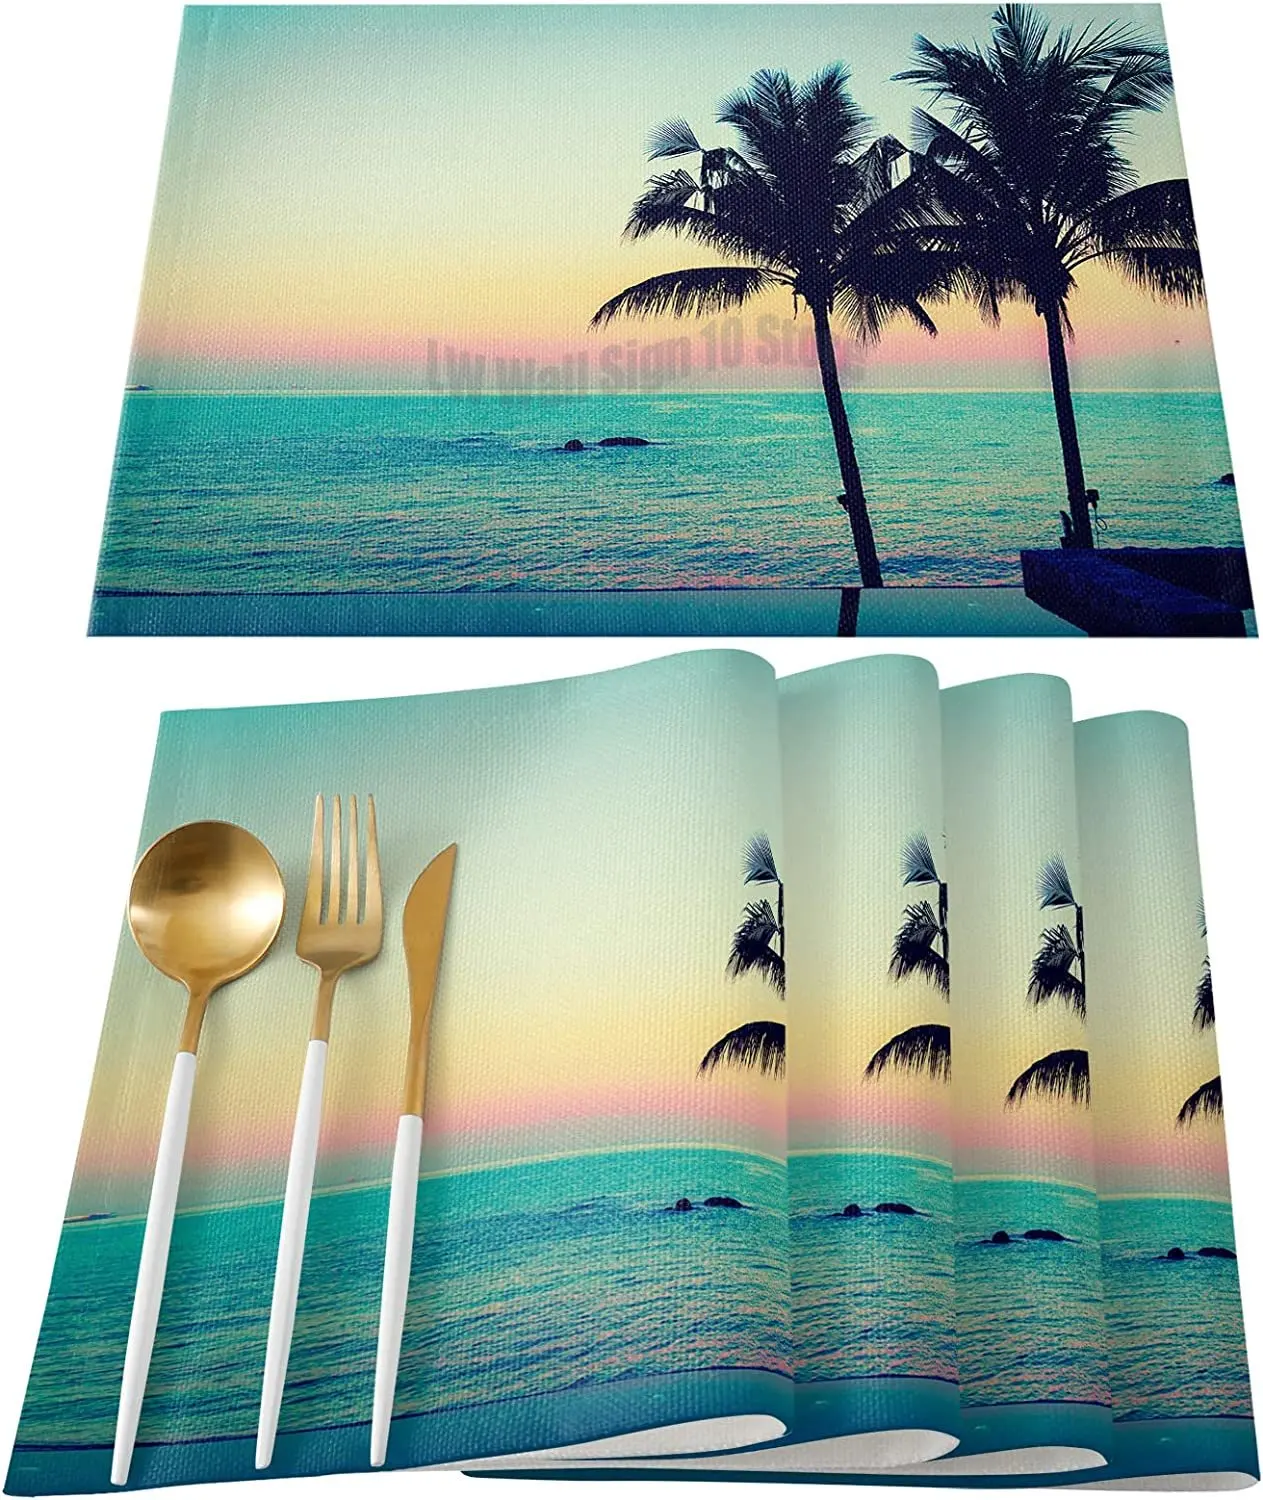 

Tropical Ocean Coast Island Palms Trees Theme Design Place Mat Easy to Clean Wipeable Placemats for Dining Kitchen Table